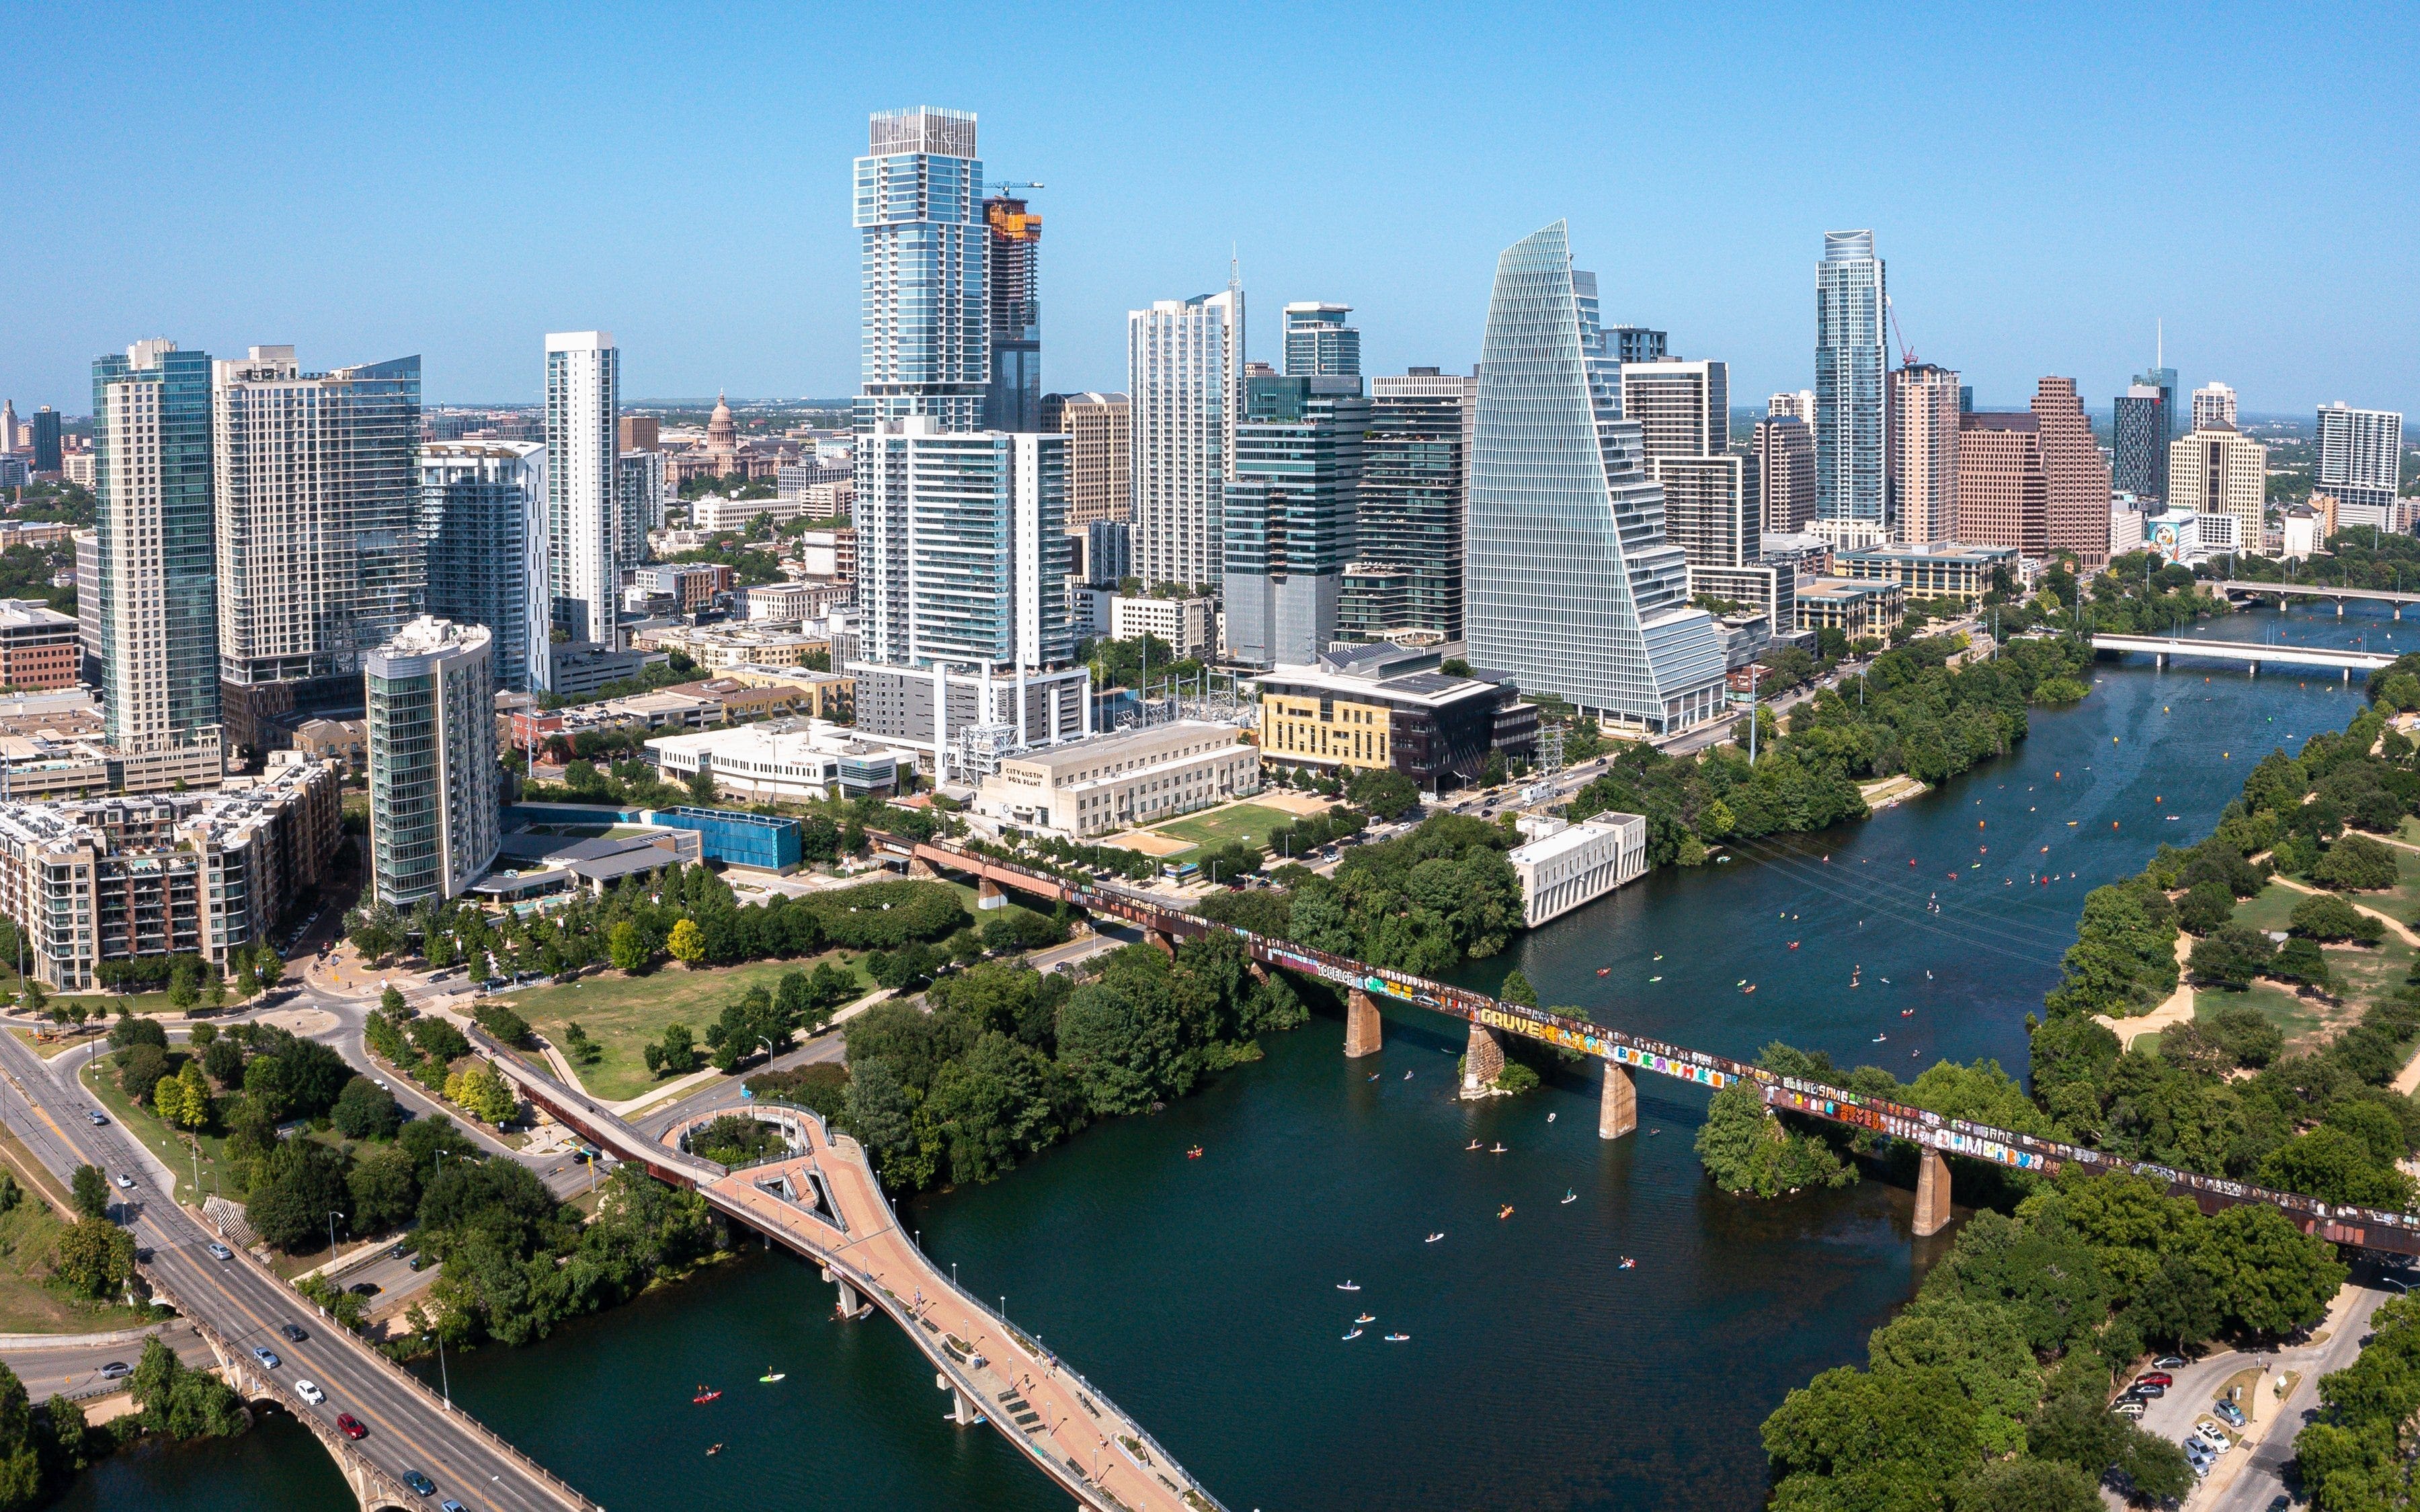 Adios, Austin: City ranks 5th among top 10 cities people are leaving in PODS survey